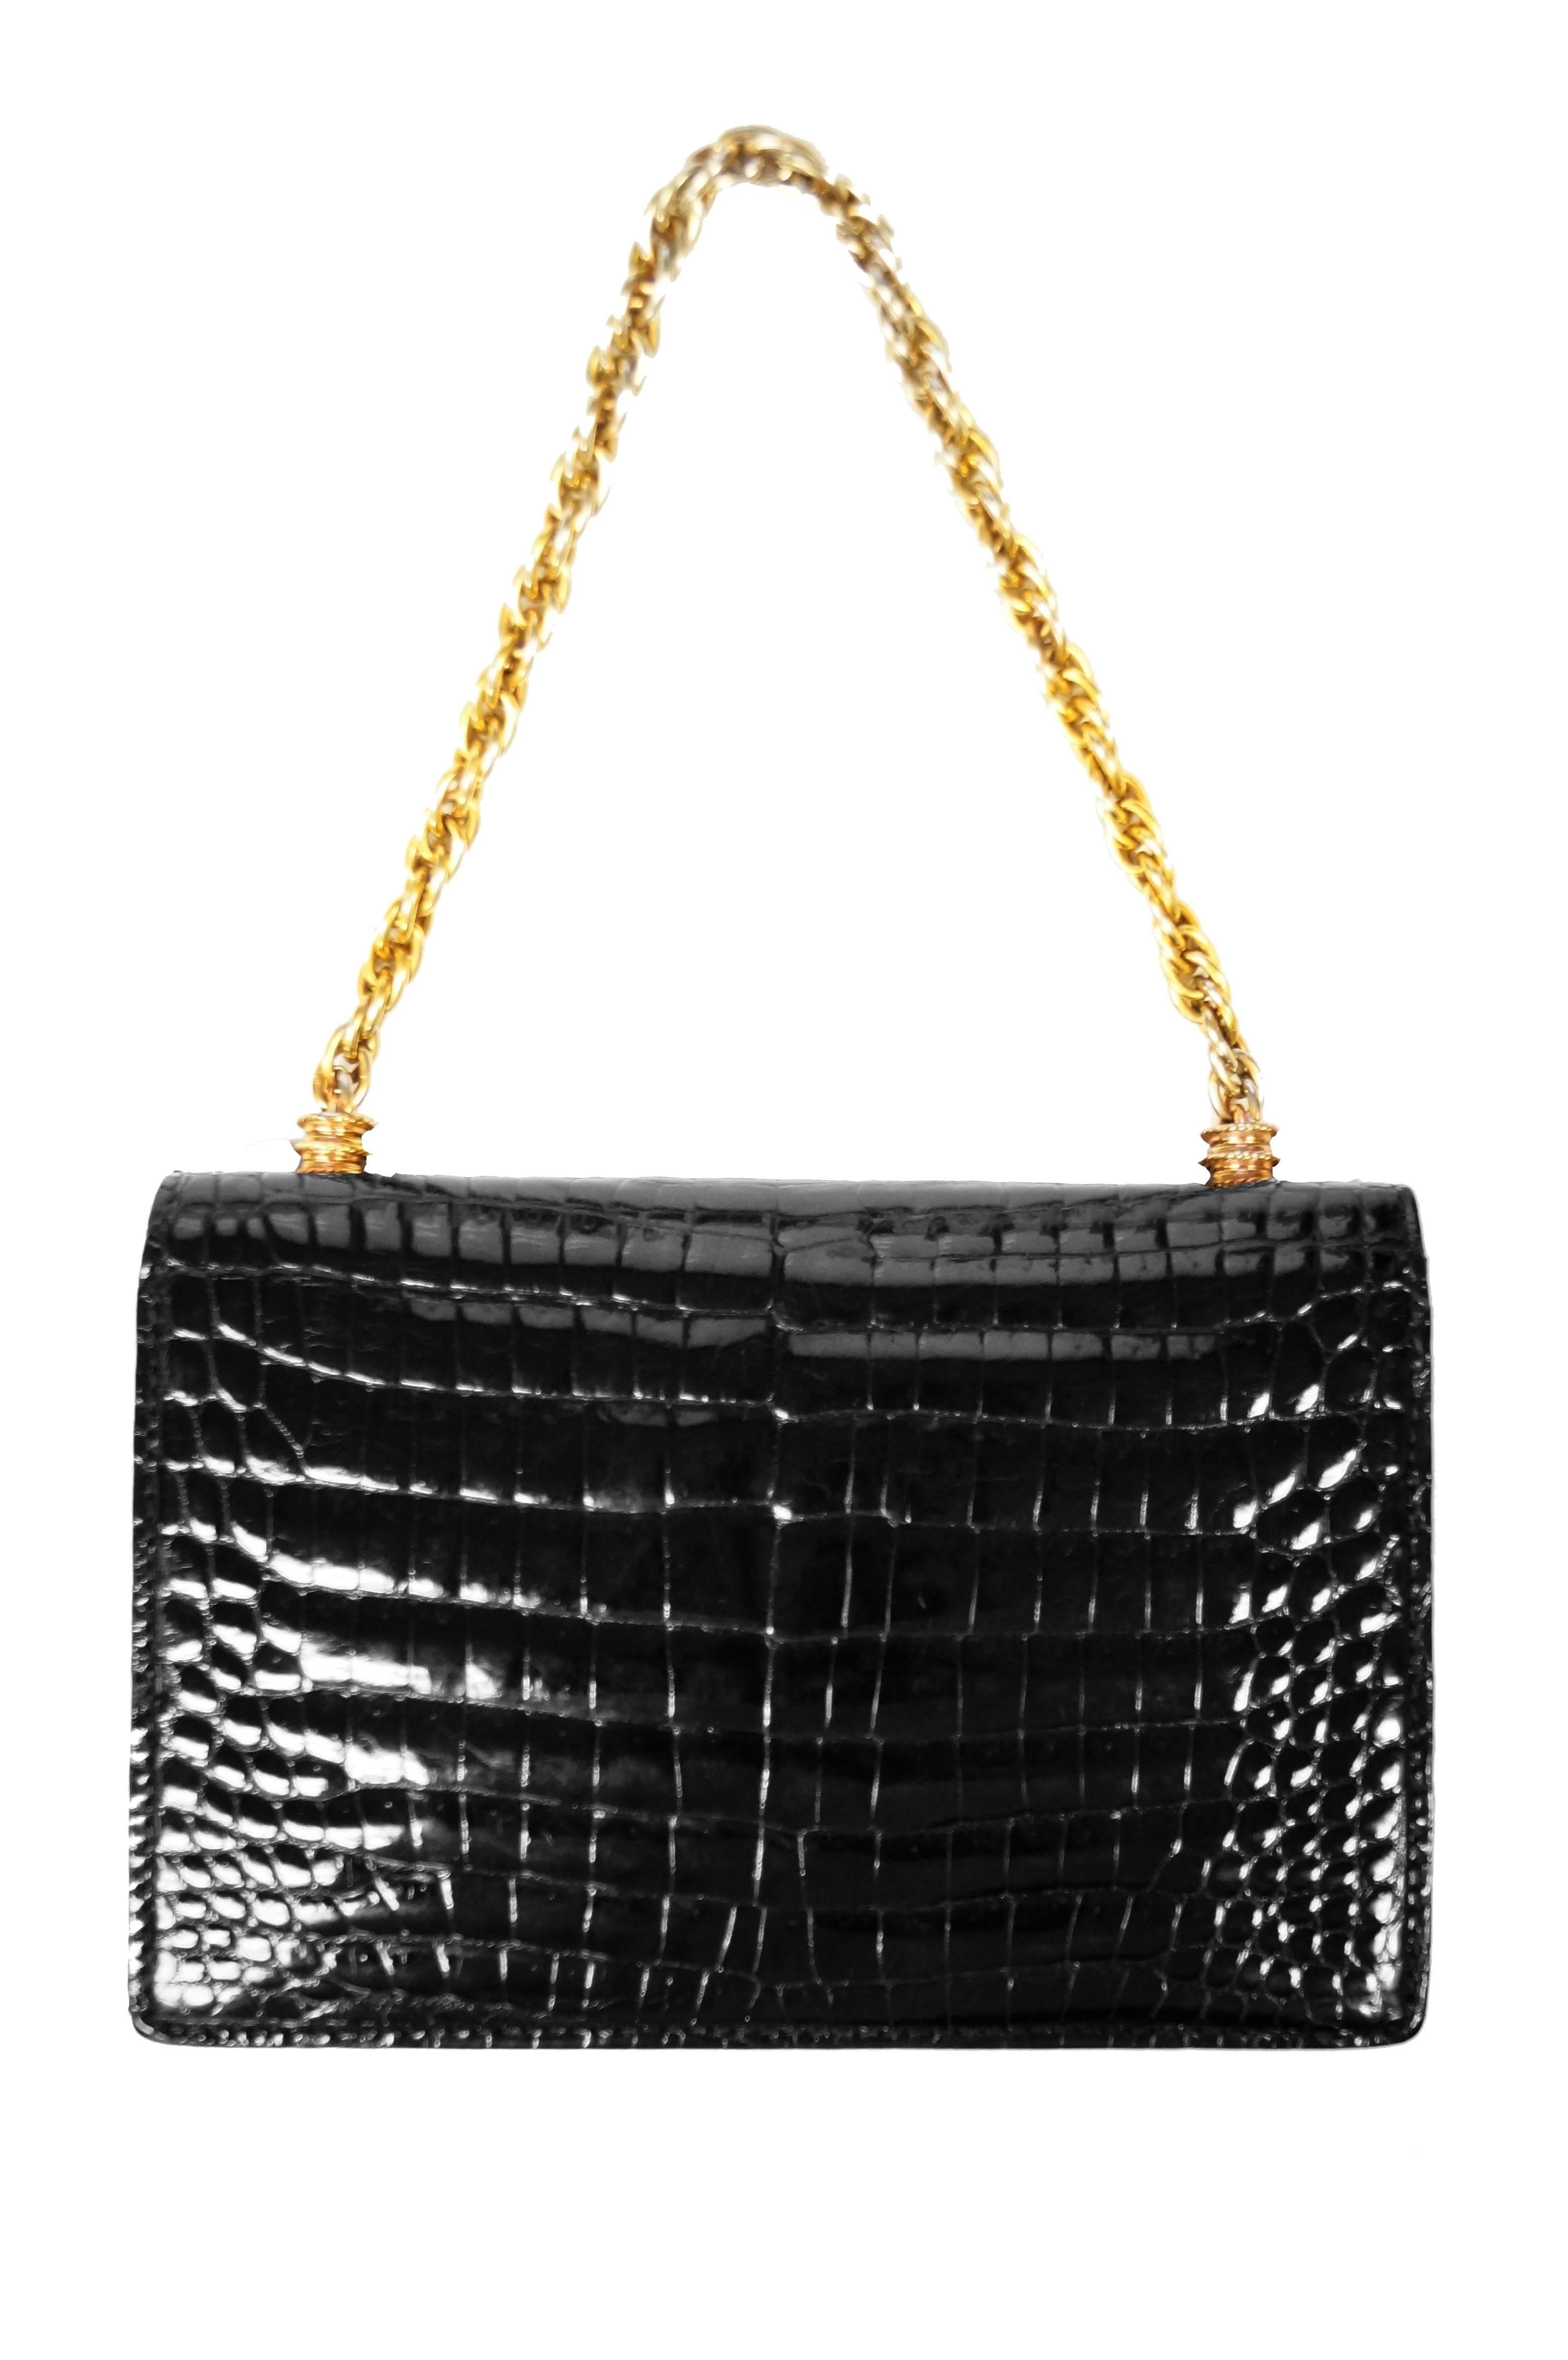 Beautiful glossy black crocodile purse by Gucci. The purse is envelope style, with a heavy brass link chain top handle and turn buckle. Subtle rope detail on handle bases, textured turn lock base. The bag has a bellows construction, with the